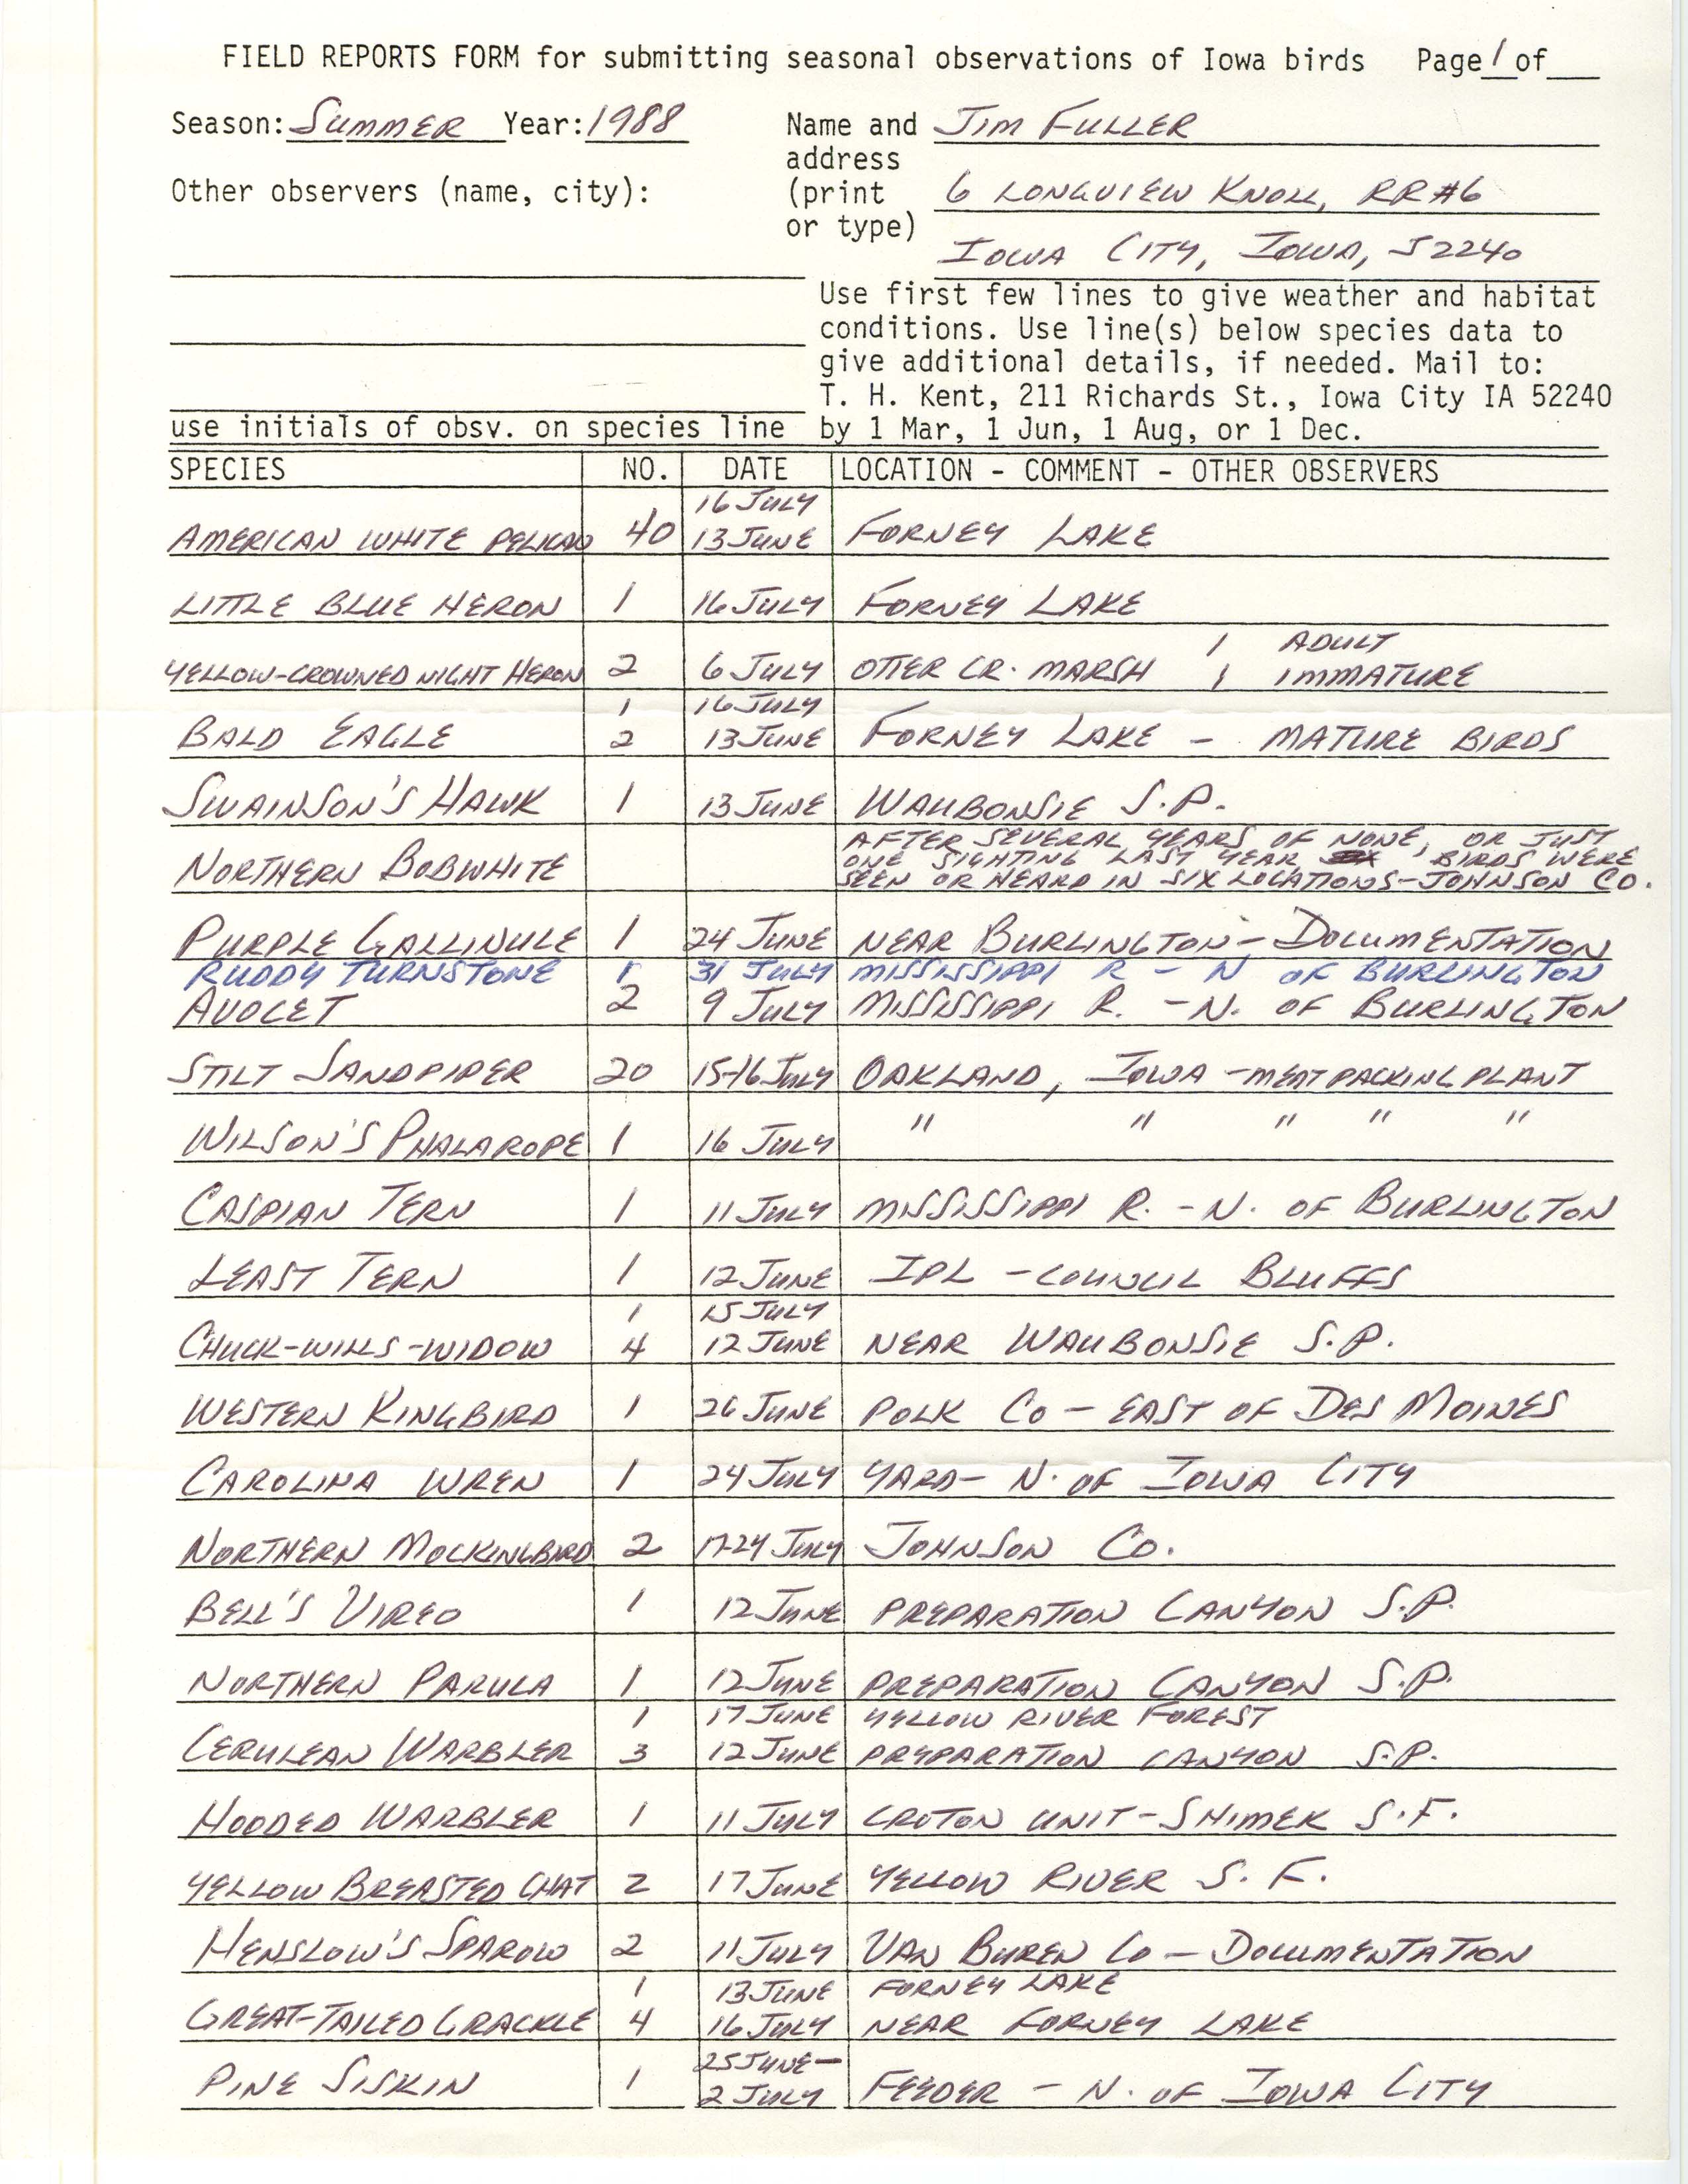 Field reports form for submitting seasonal observations of Iowa birds, James L. Fuller, summer 1988